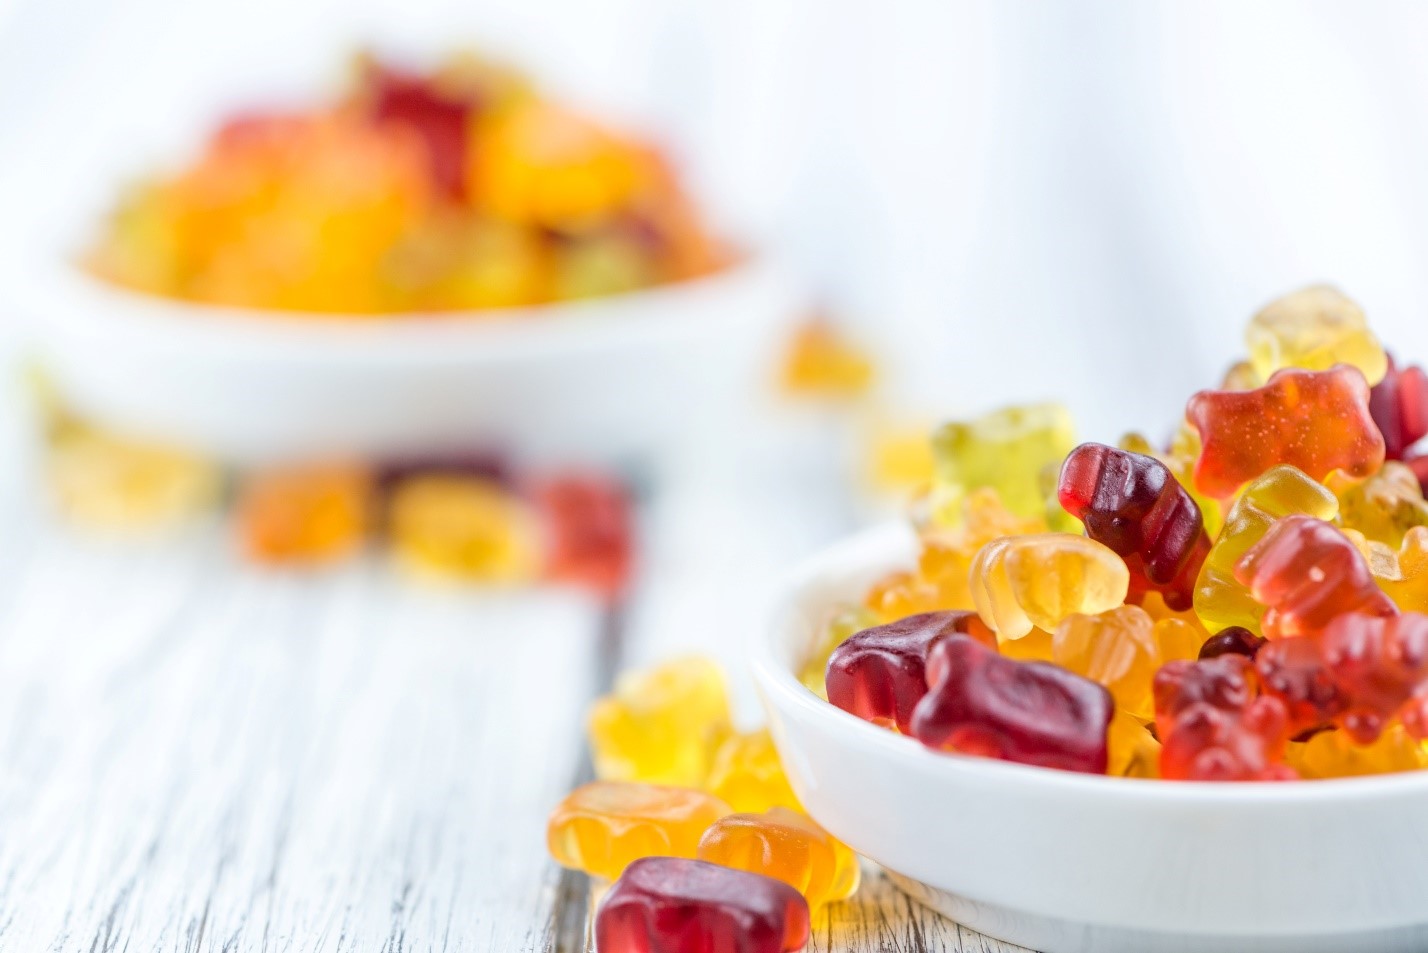 A bowl of gummy bears on white wooden background